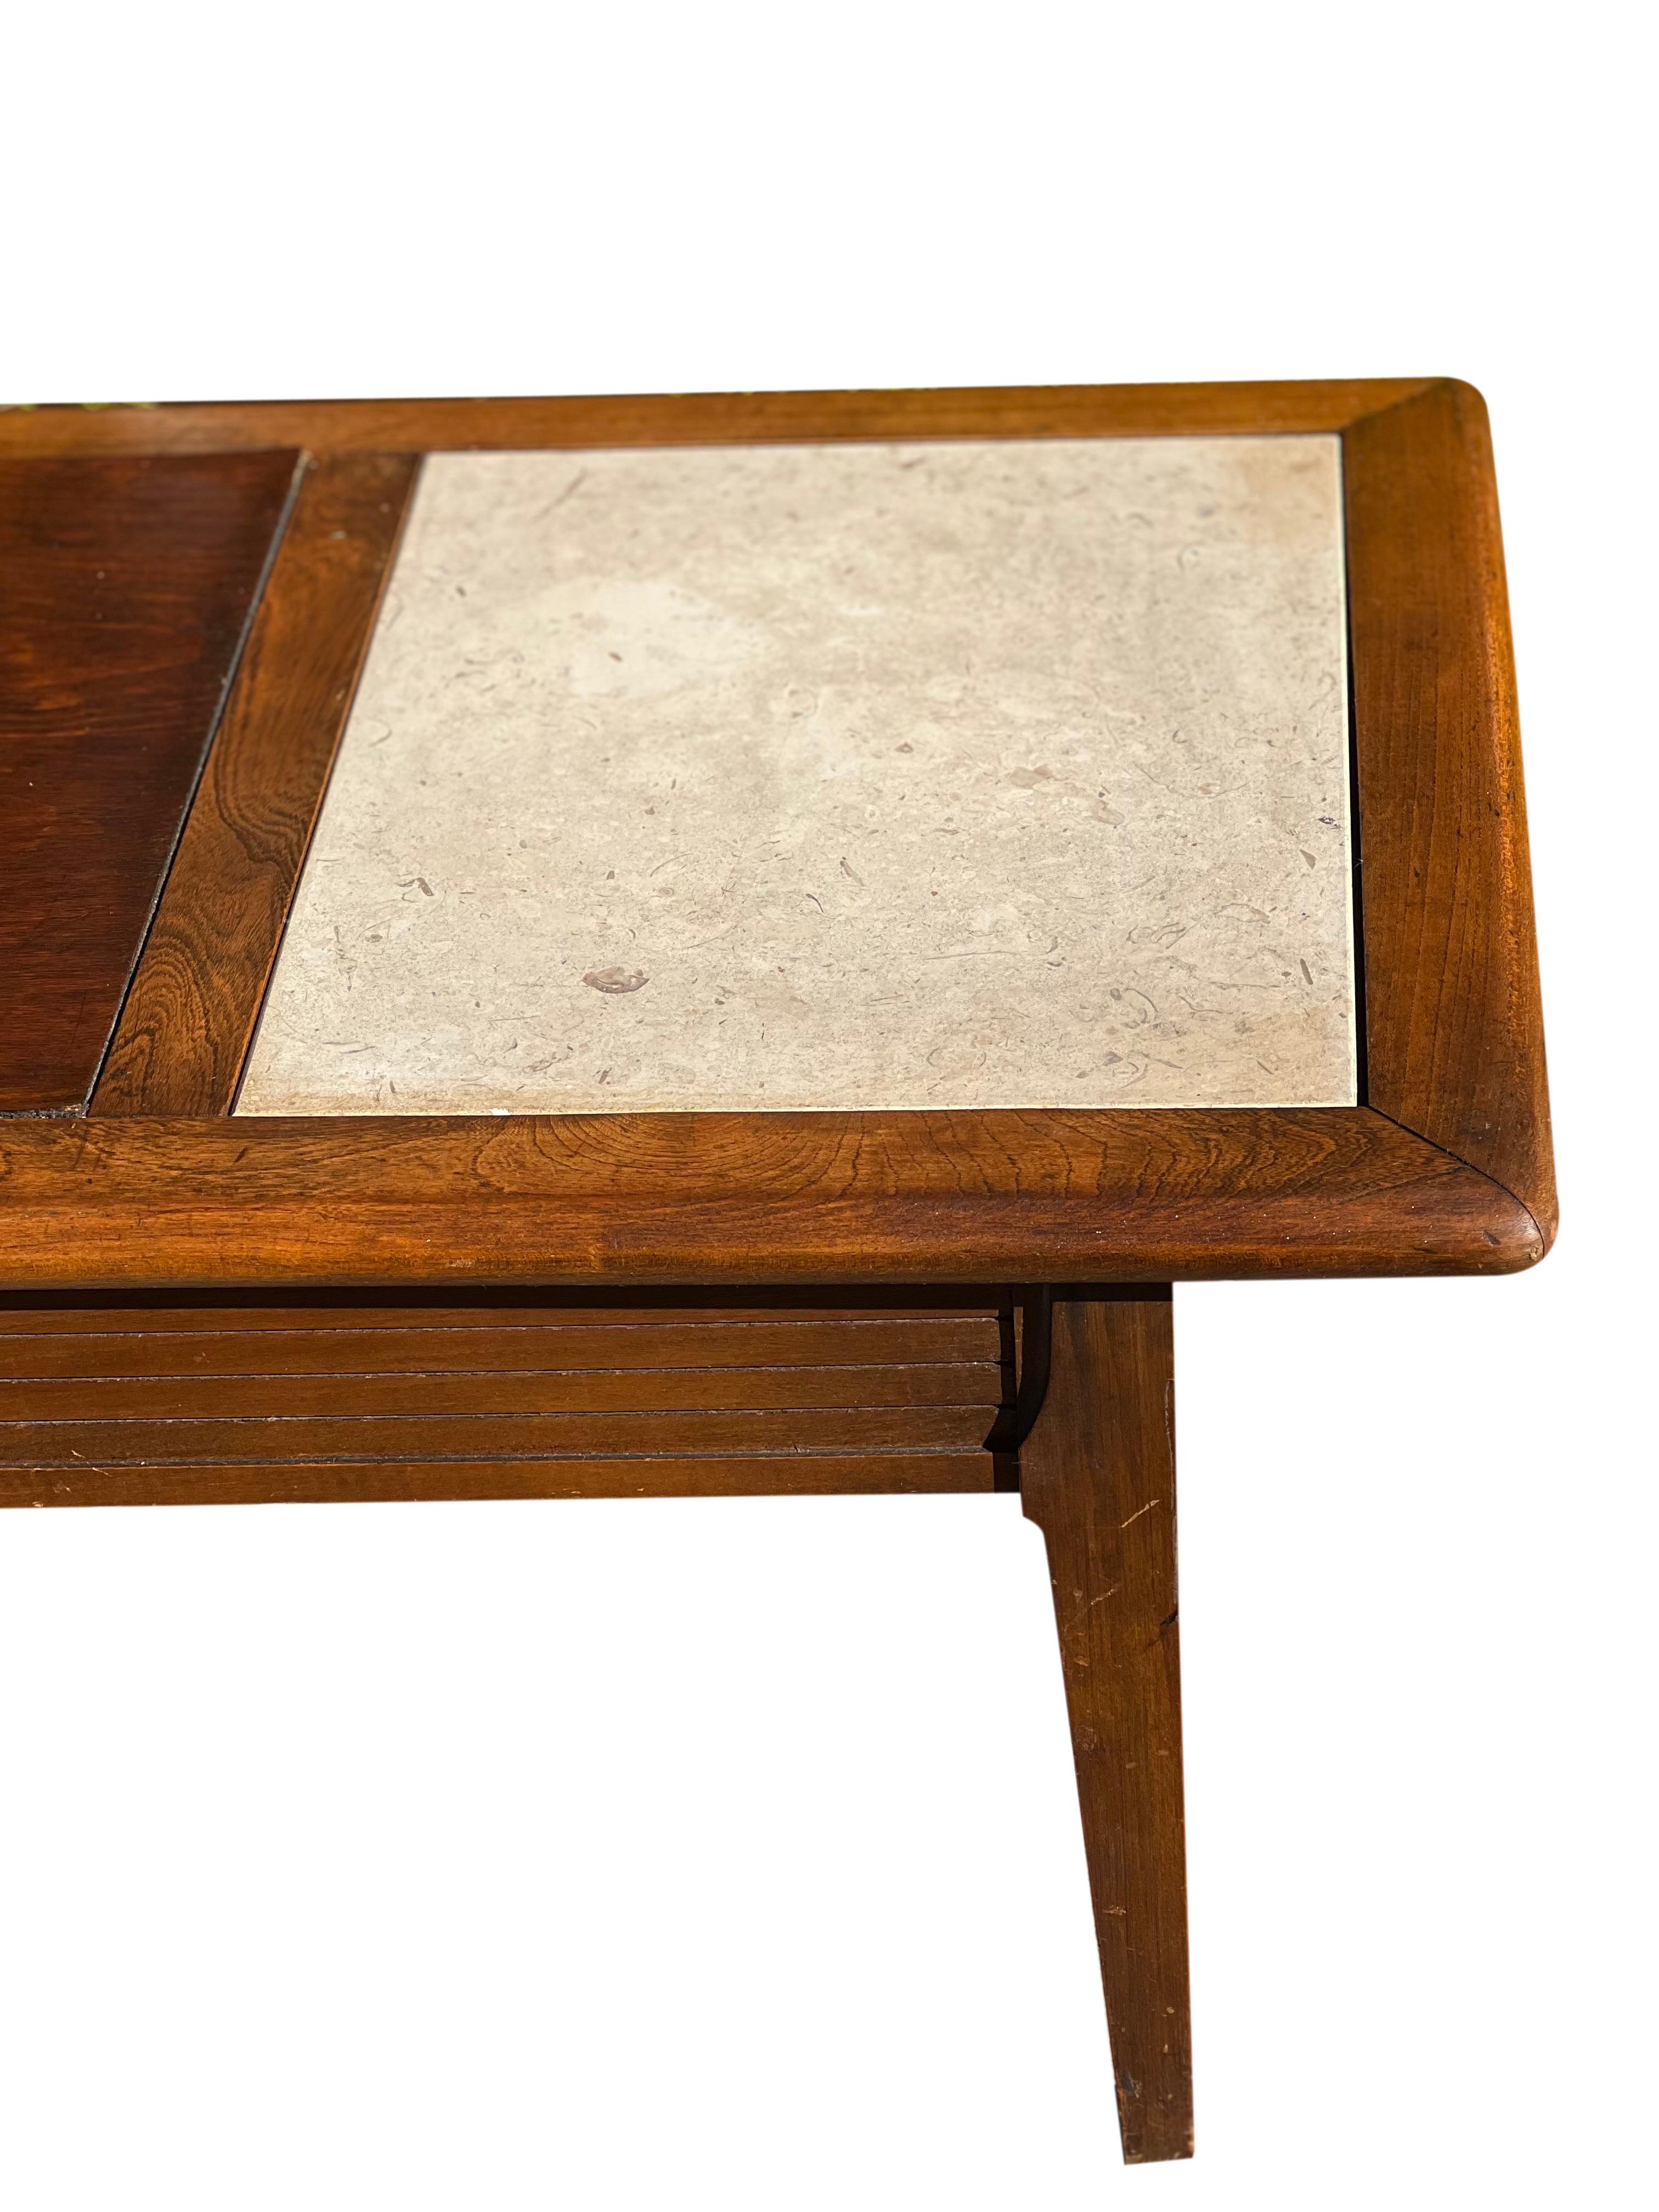 Mid Century Lane Style Walnut Coffee Table with Travertine Inserts In Good Condition For Sale In Doylestown, PA